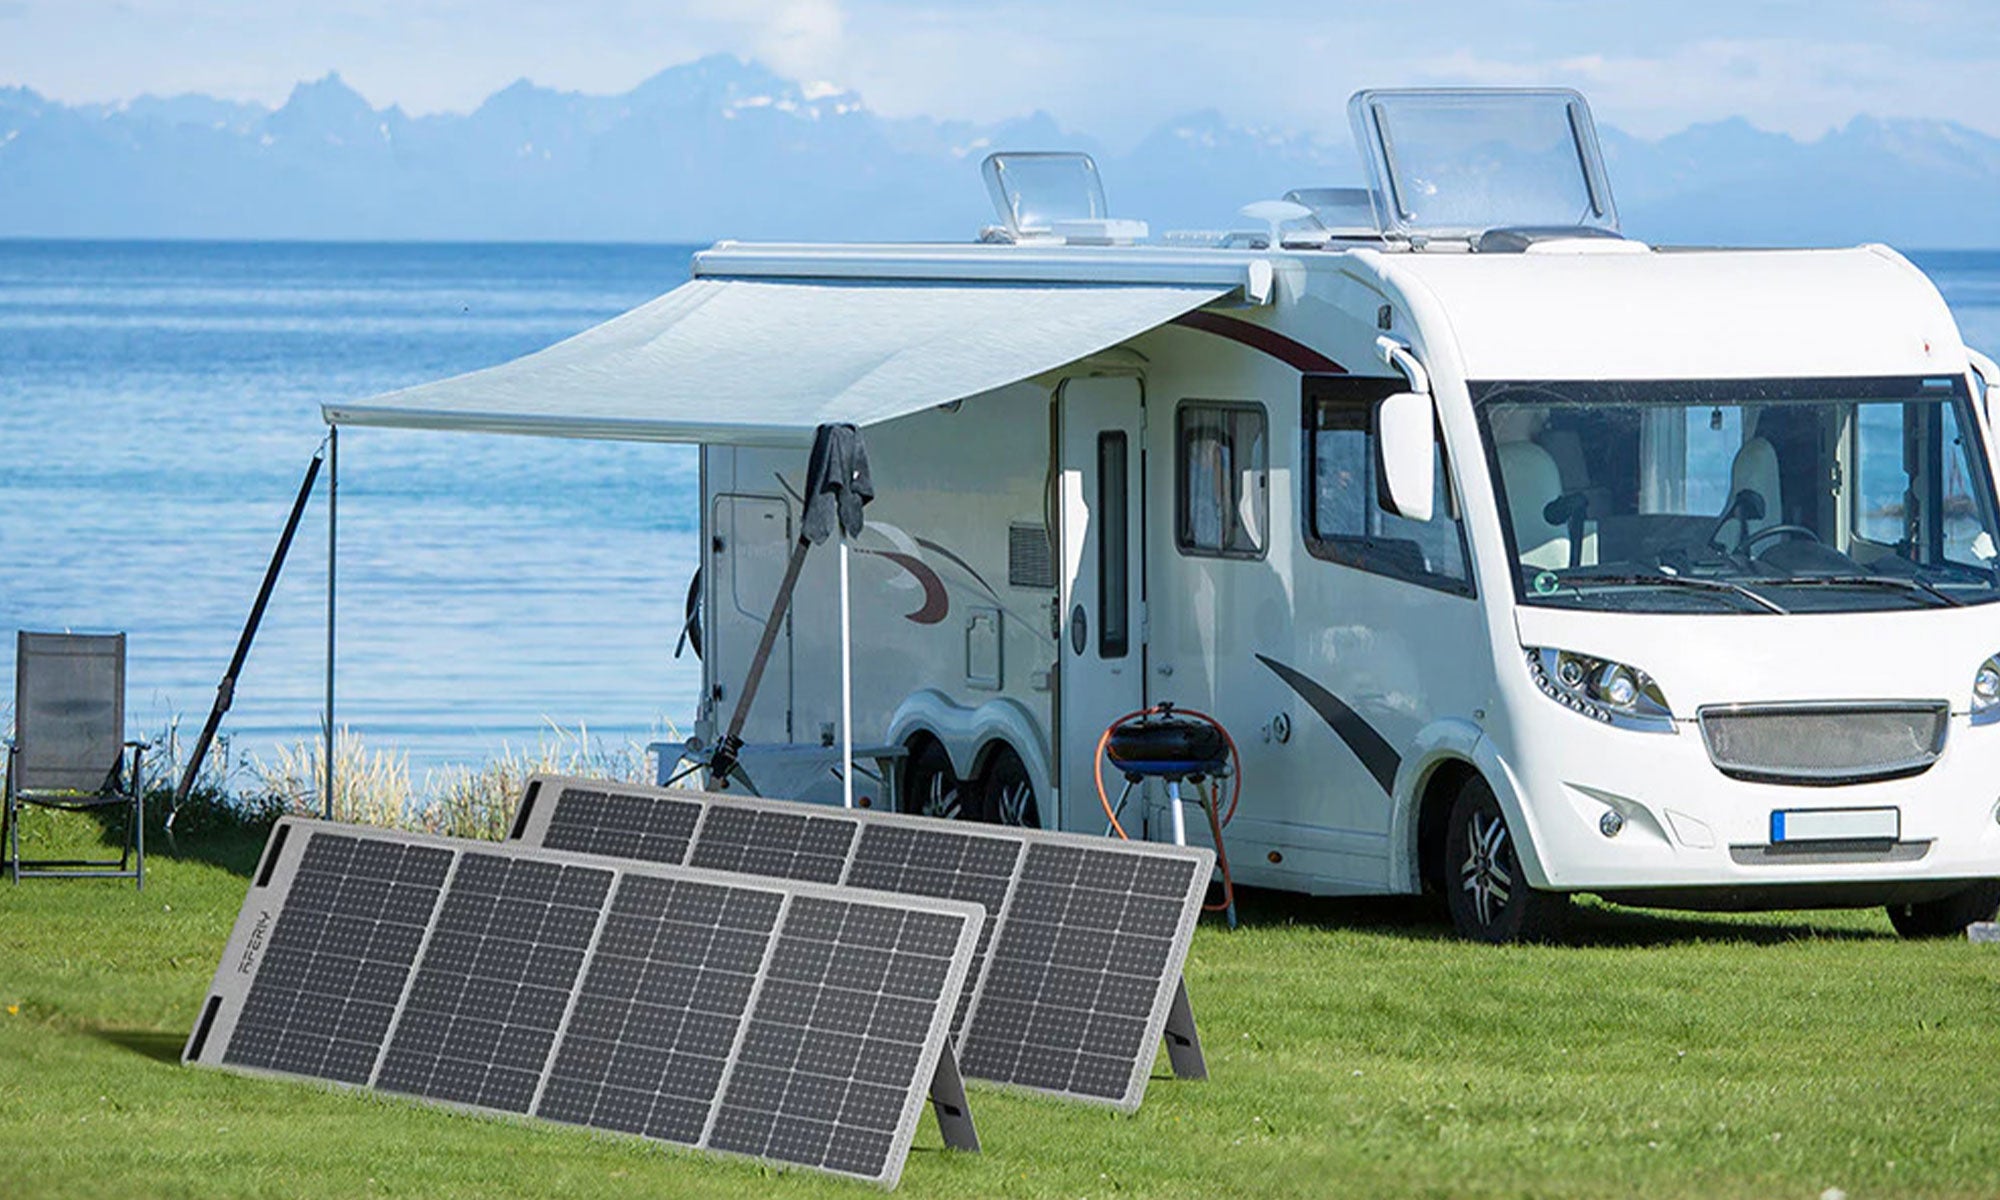 Aferiy Solar Generator Is Compact and Lightweight